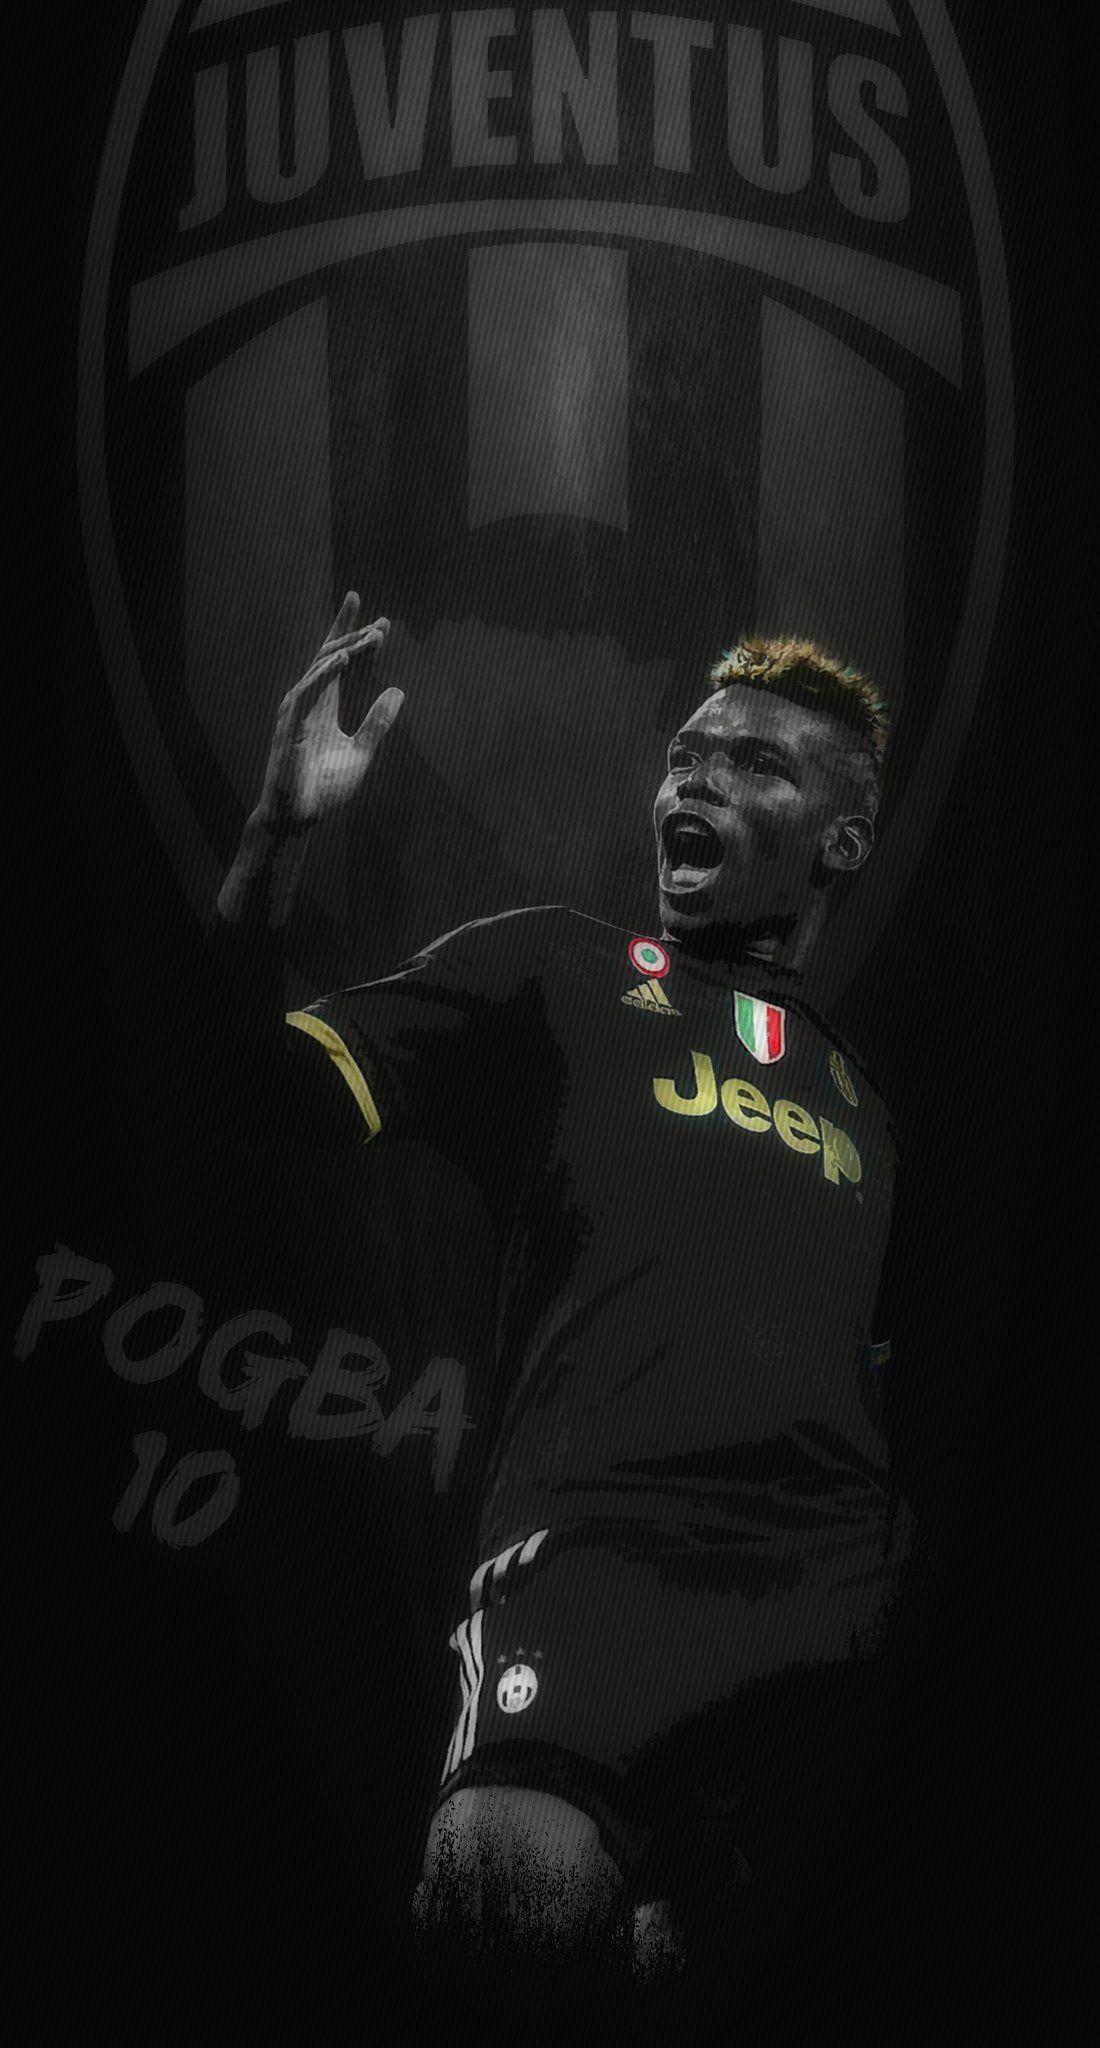 The love for Juventus made me create wallpaper for mobile phones